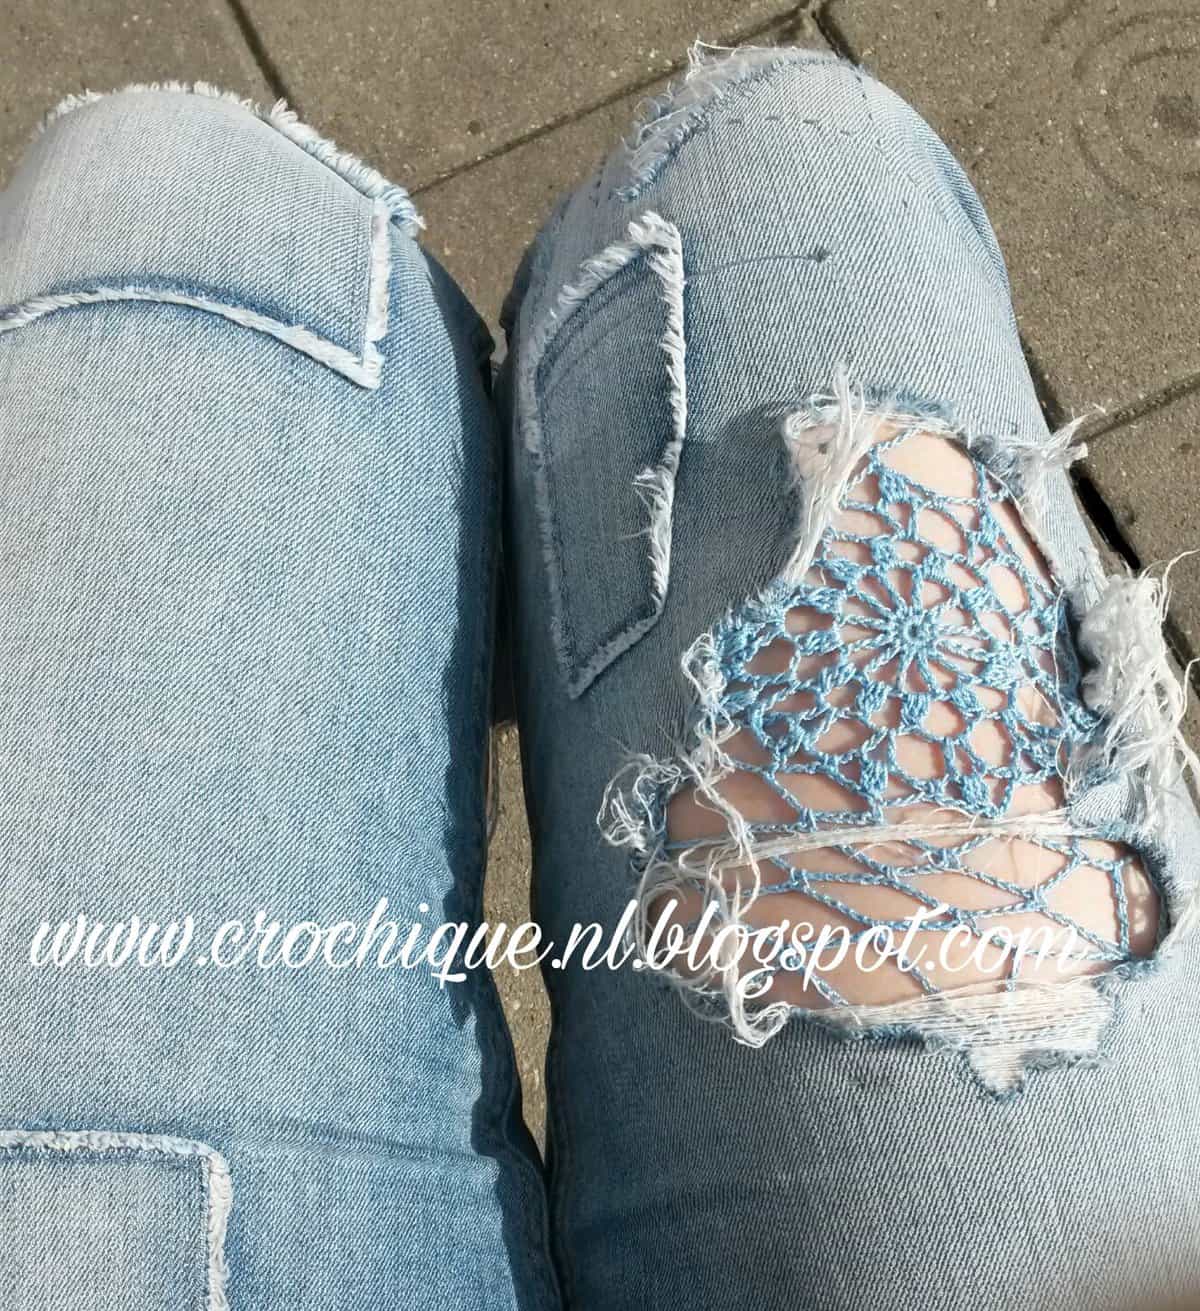 Free crochet lace doily pattern for adding crochet to any pair of jeans.